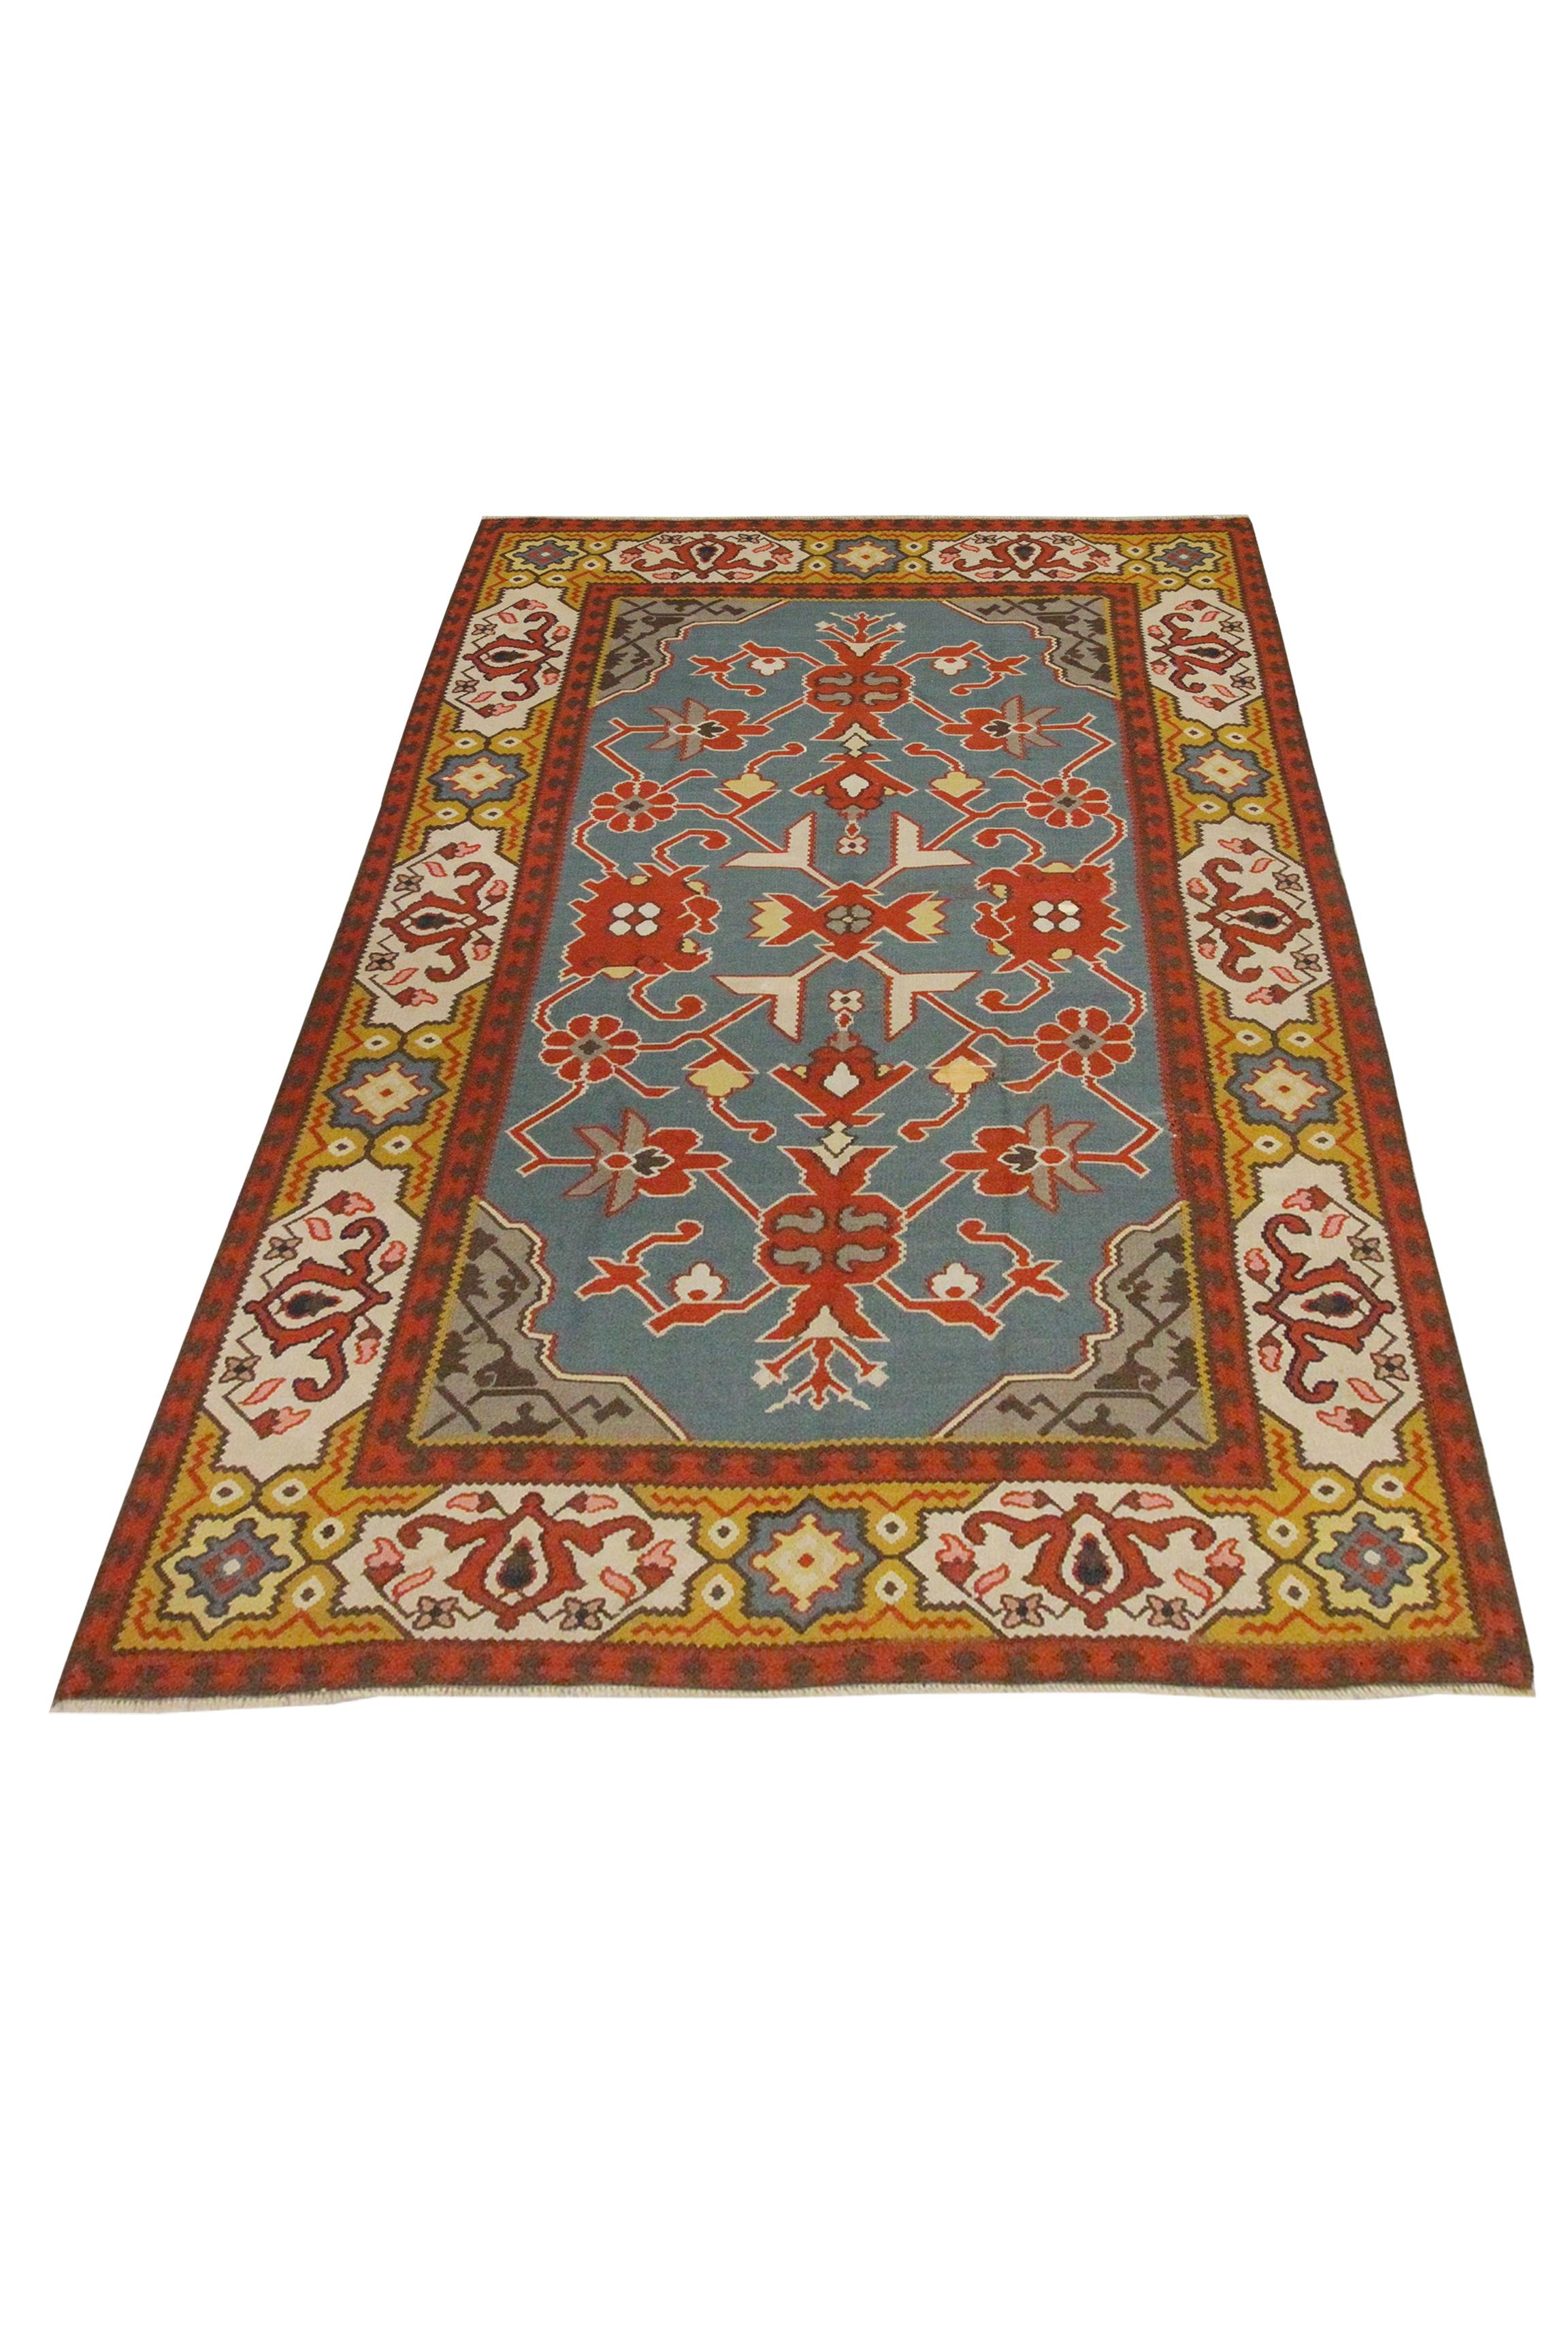 This bold oriental Kilim is a great example of antique kilims. The central design has been woven in blue, red and yellow accents that make up the decorative symmetrical floral motif design. Oriental rugs can be used as an accent accessory to